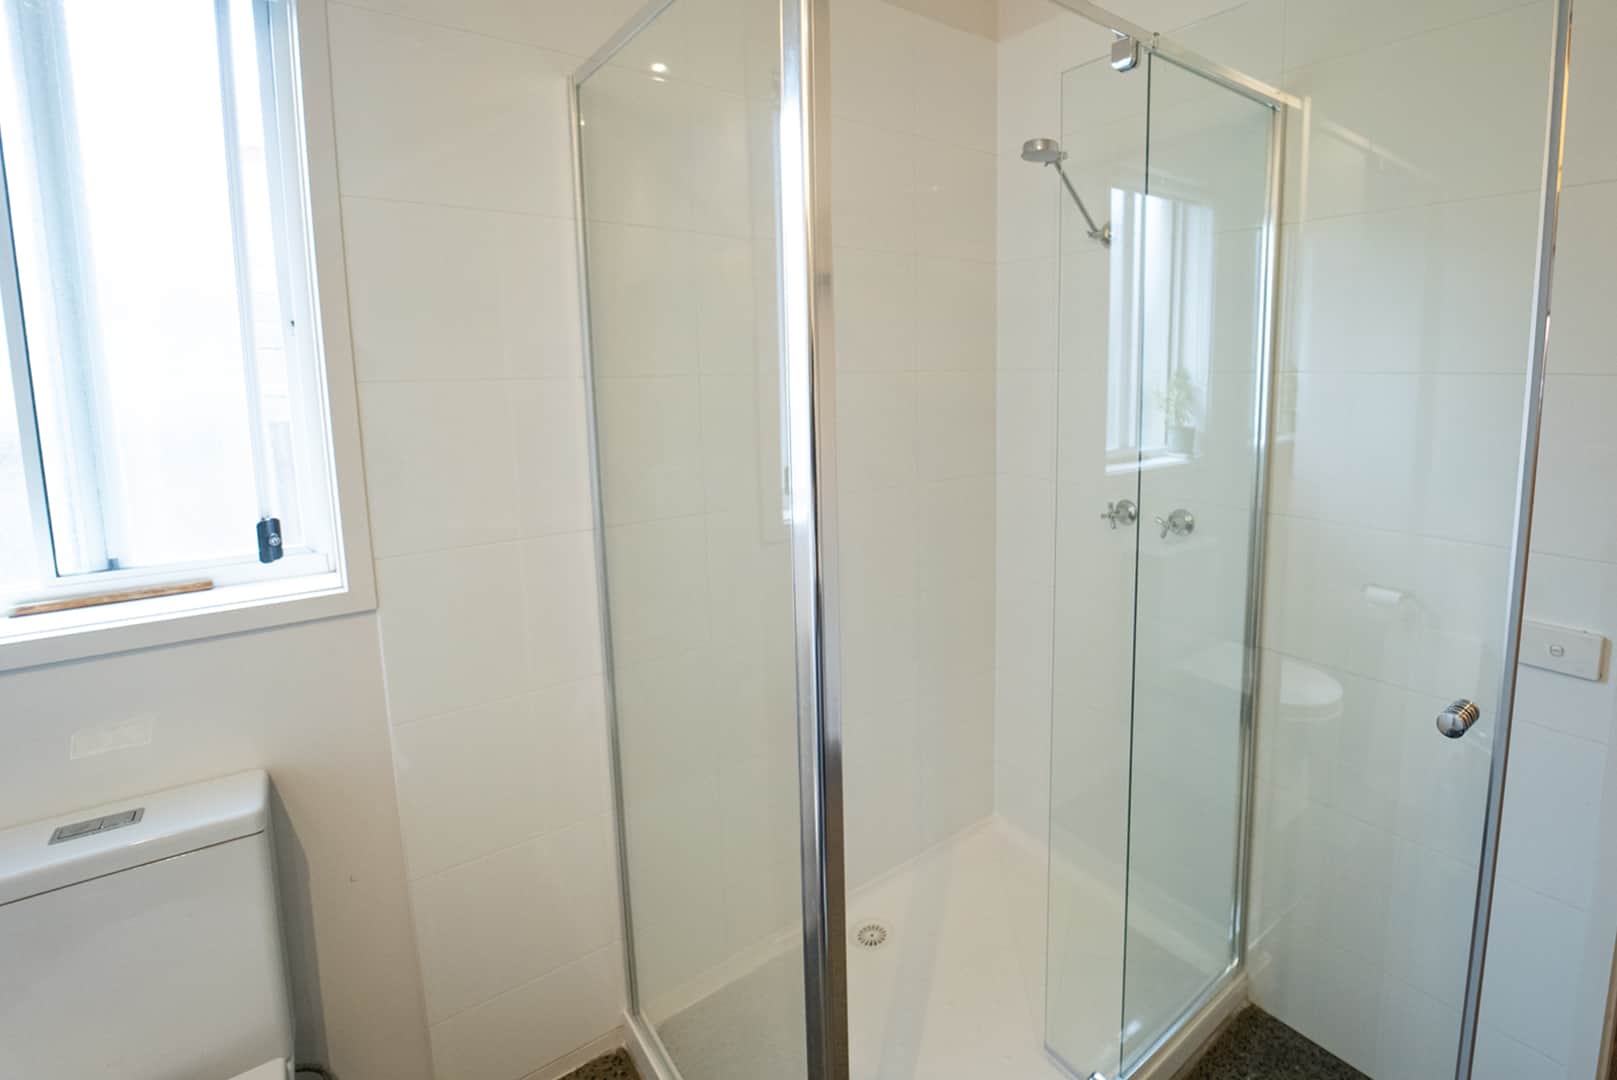 Re-tile and Waterproof Shower Recess Walls Package - The Shower Man Melbourne